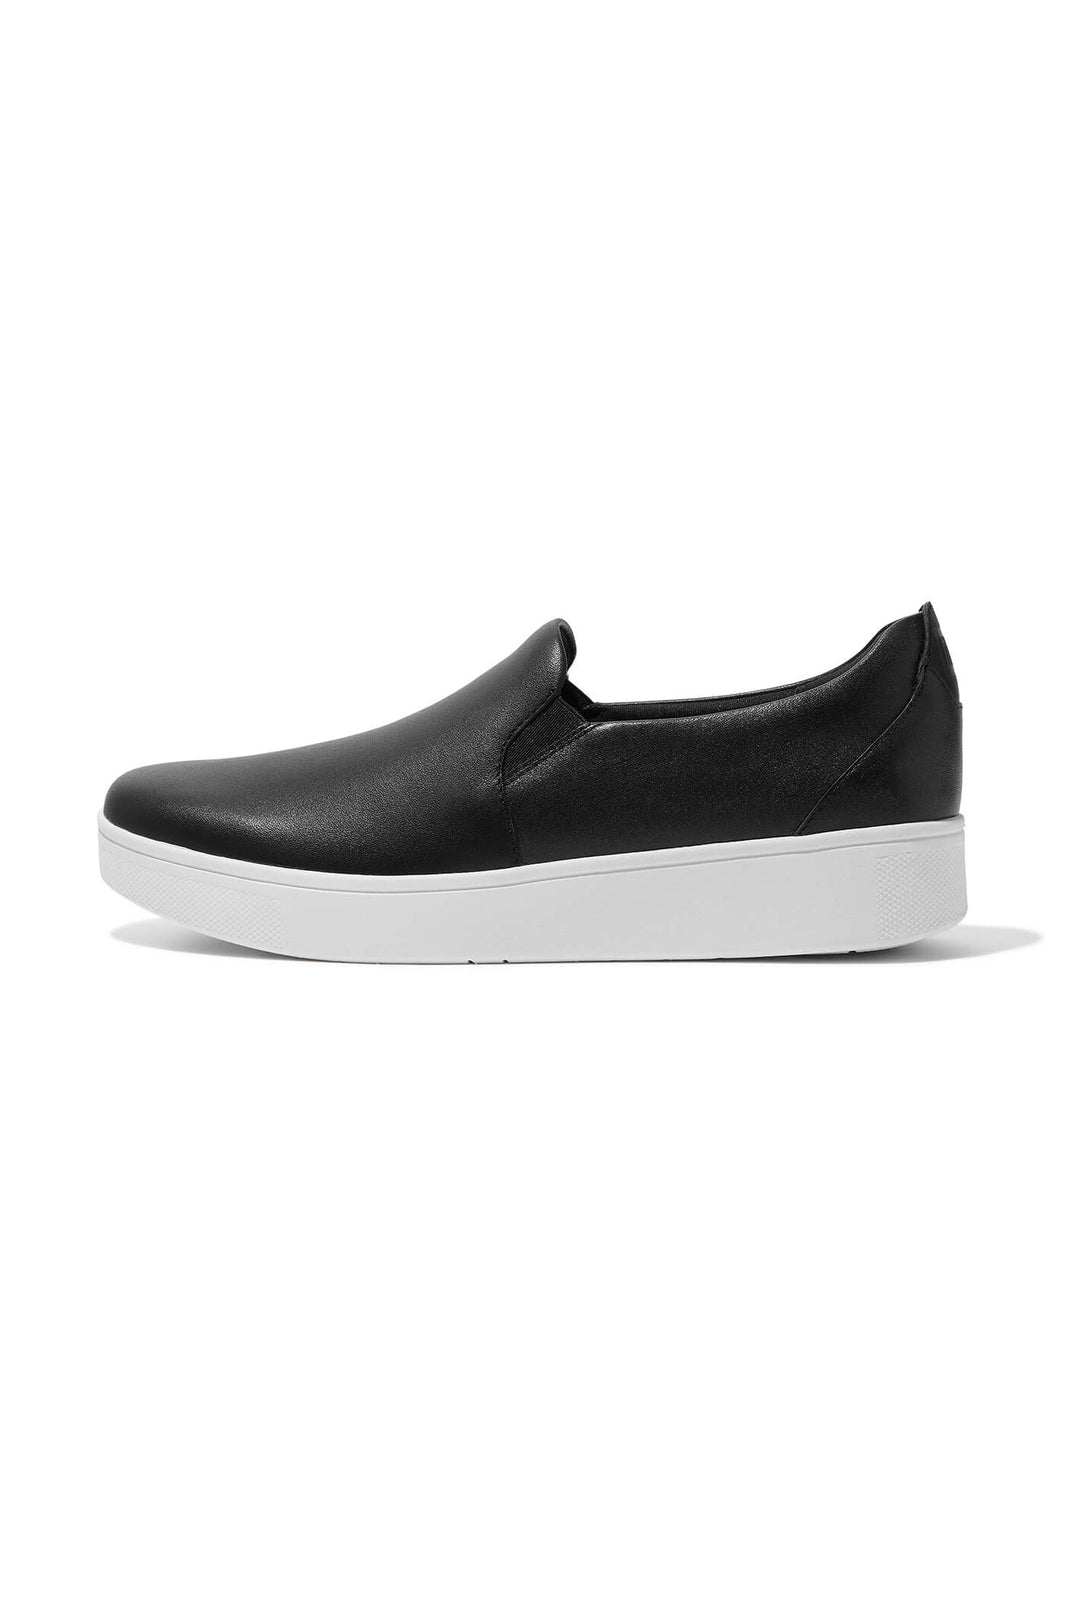 Fitflop Rally FC7-001 Leather Slip-On Skate Black Trainer - Shirley Allum Boutique